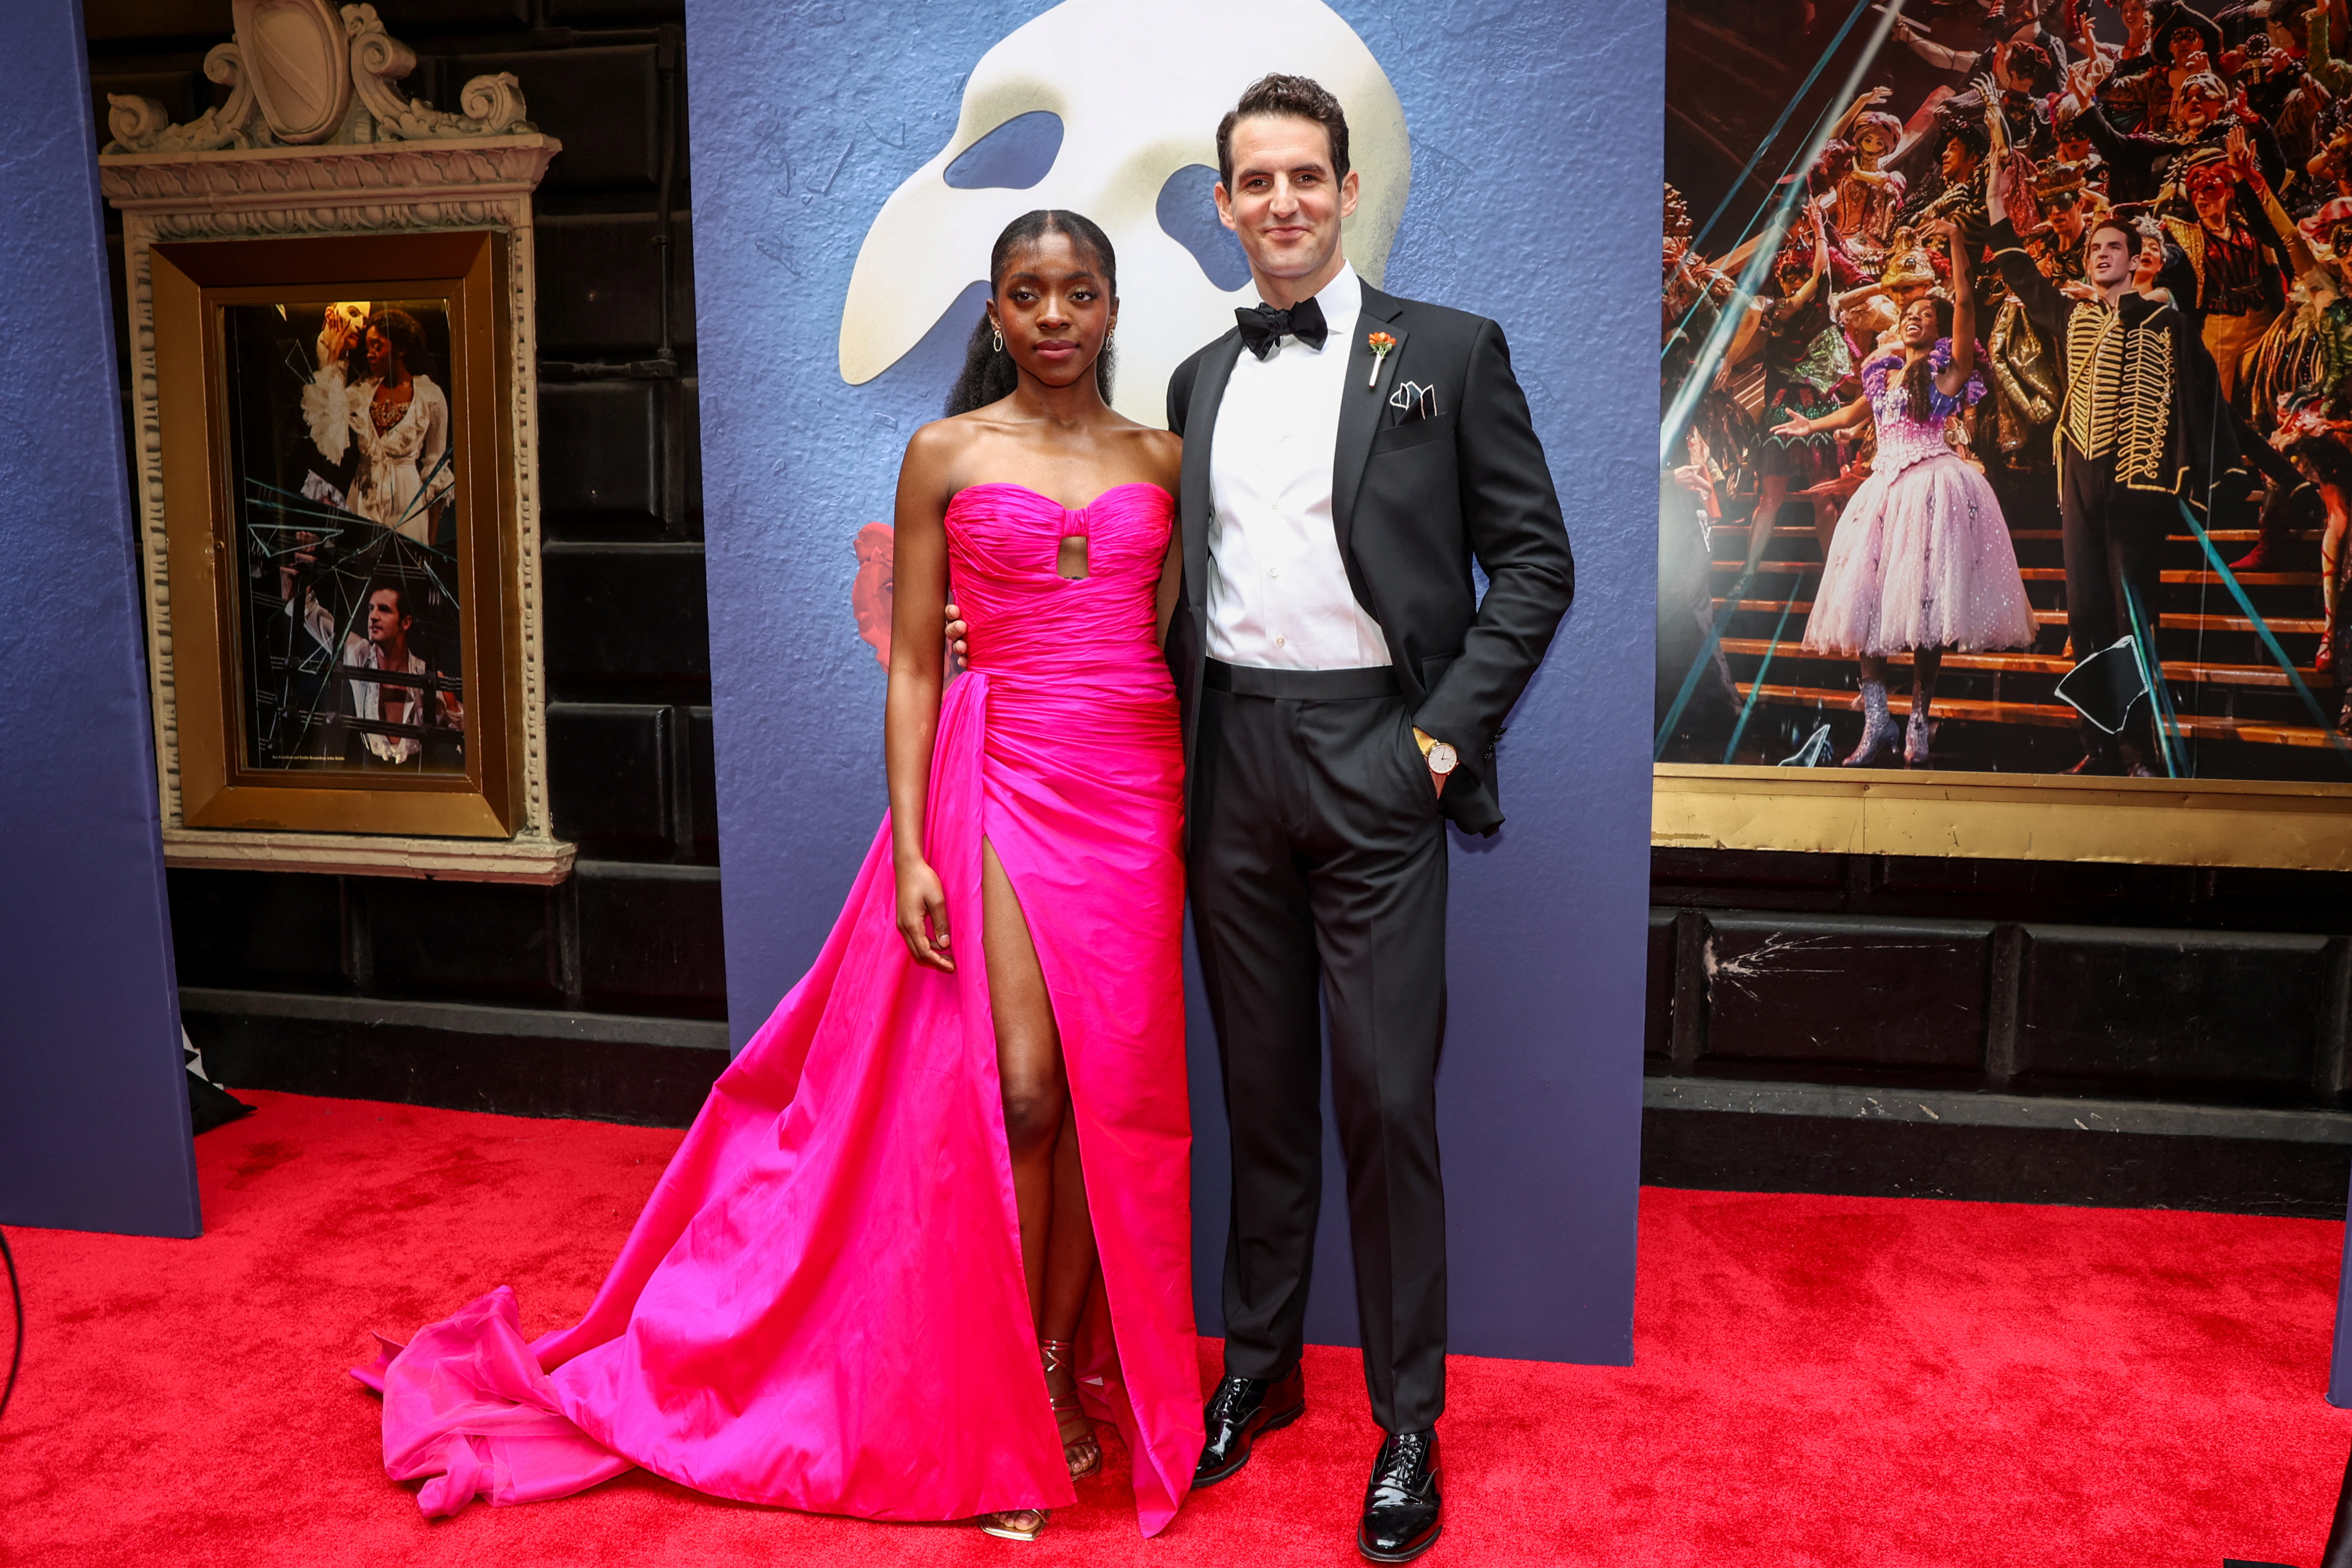 Emilie Kouatchou, who plays Christine Daae, and John Riddle, who plays Raoul, on the red carpet before the final performance of the Phantom of the Opera.  (PHOTO: REUTERS/Caitlin Ochs)